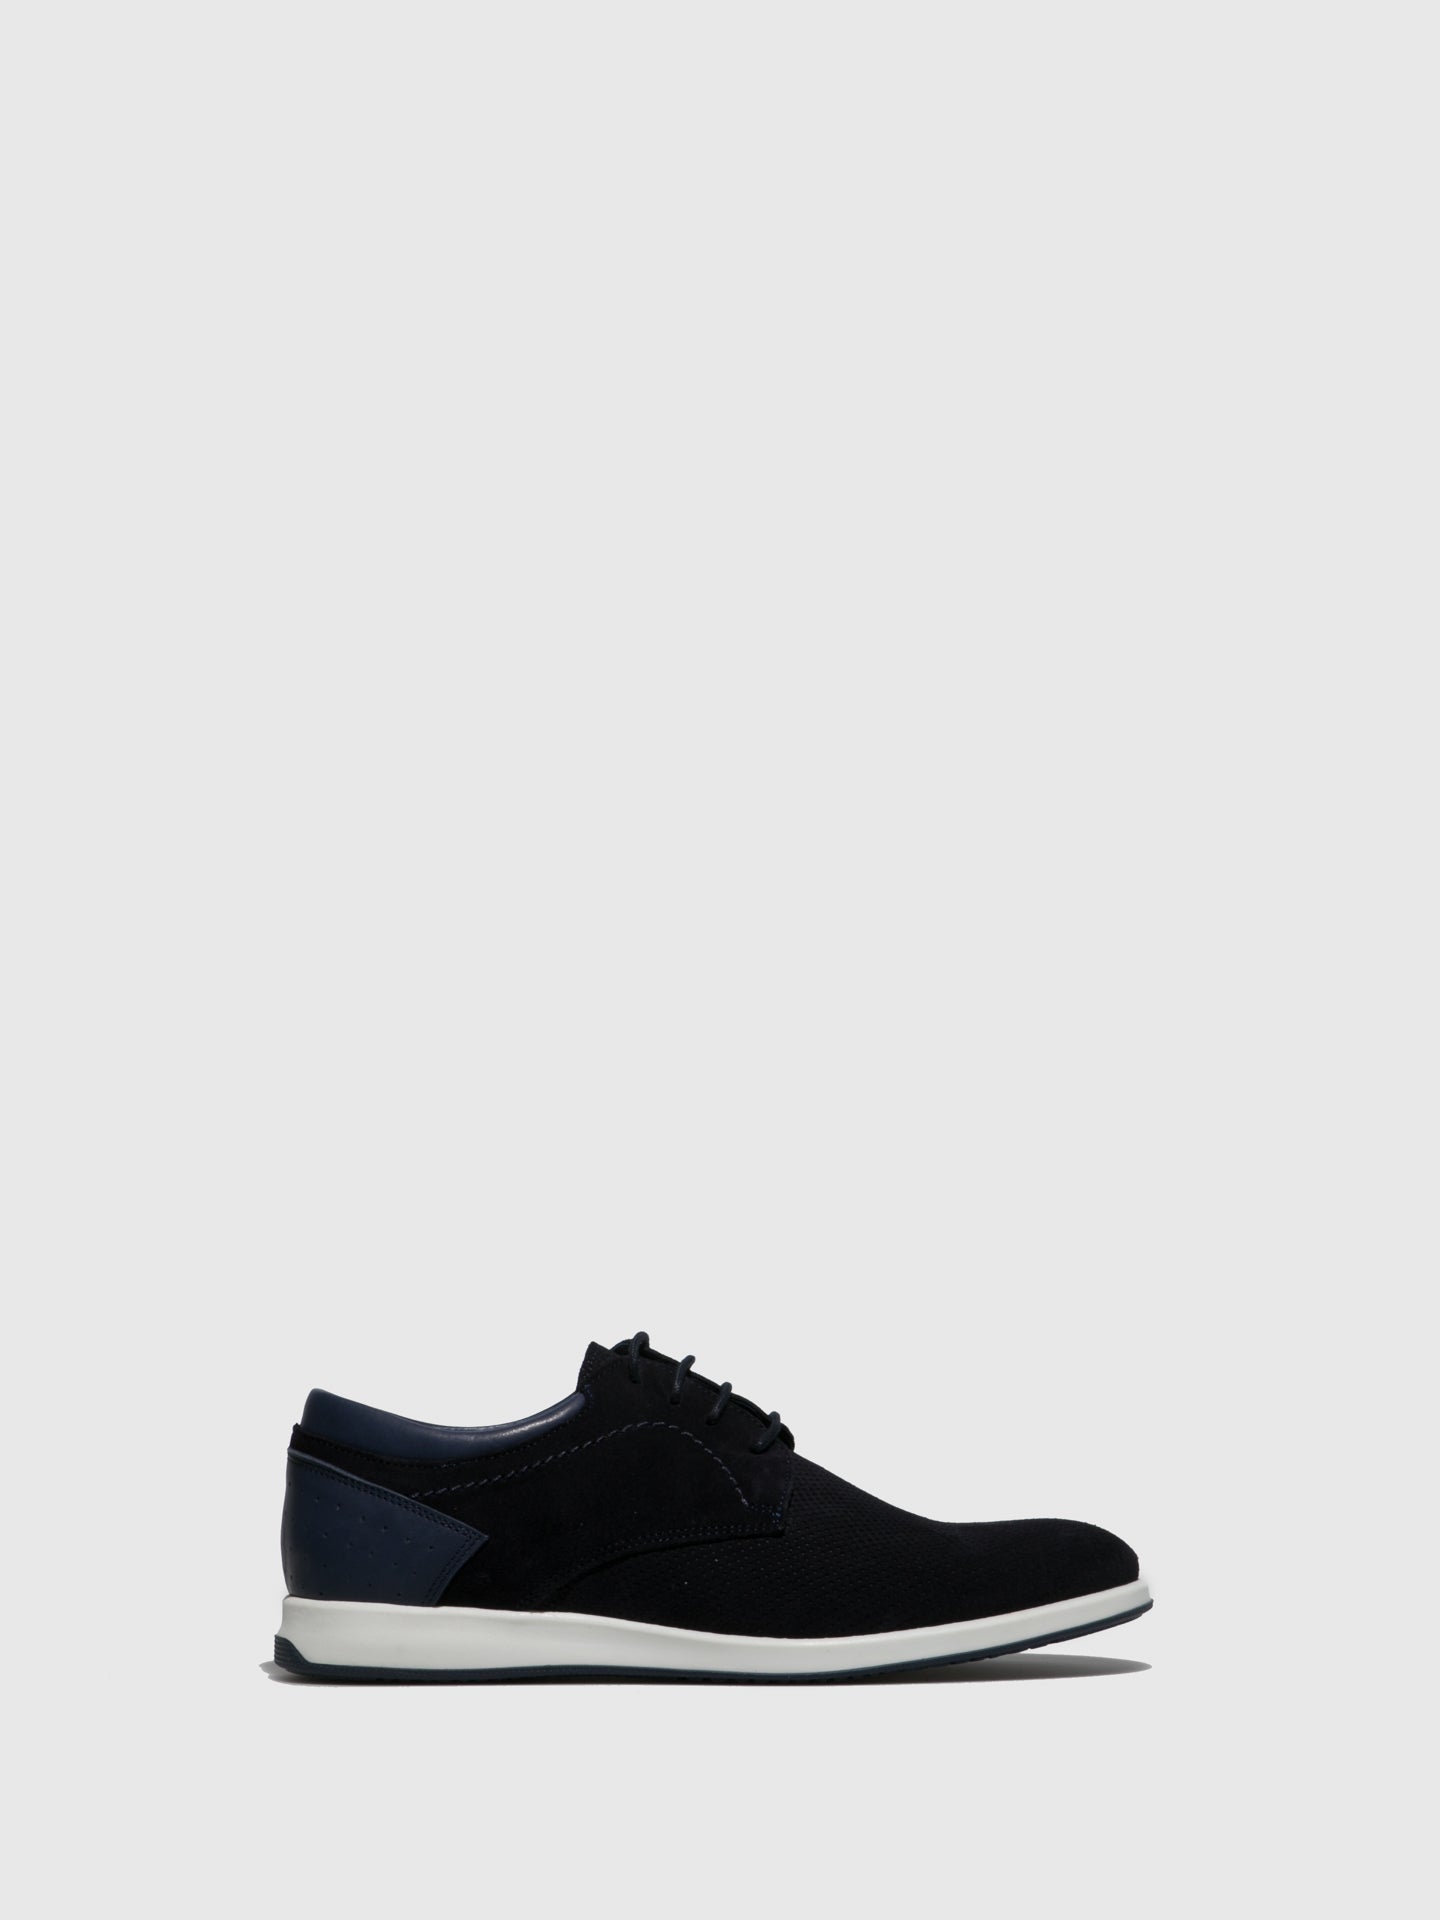 Foreva Navy Derby Shoes